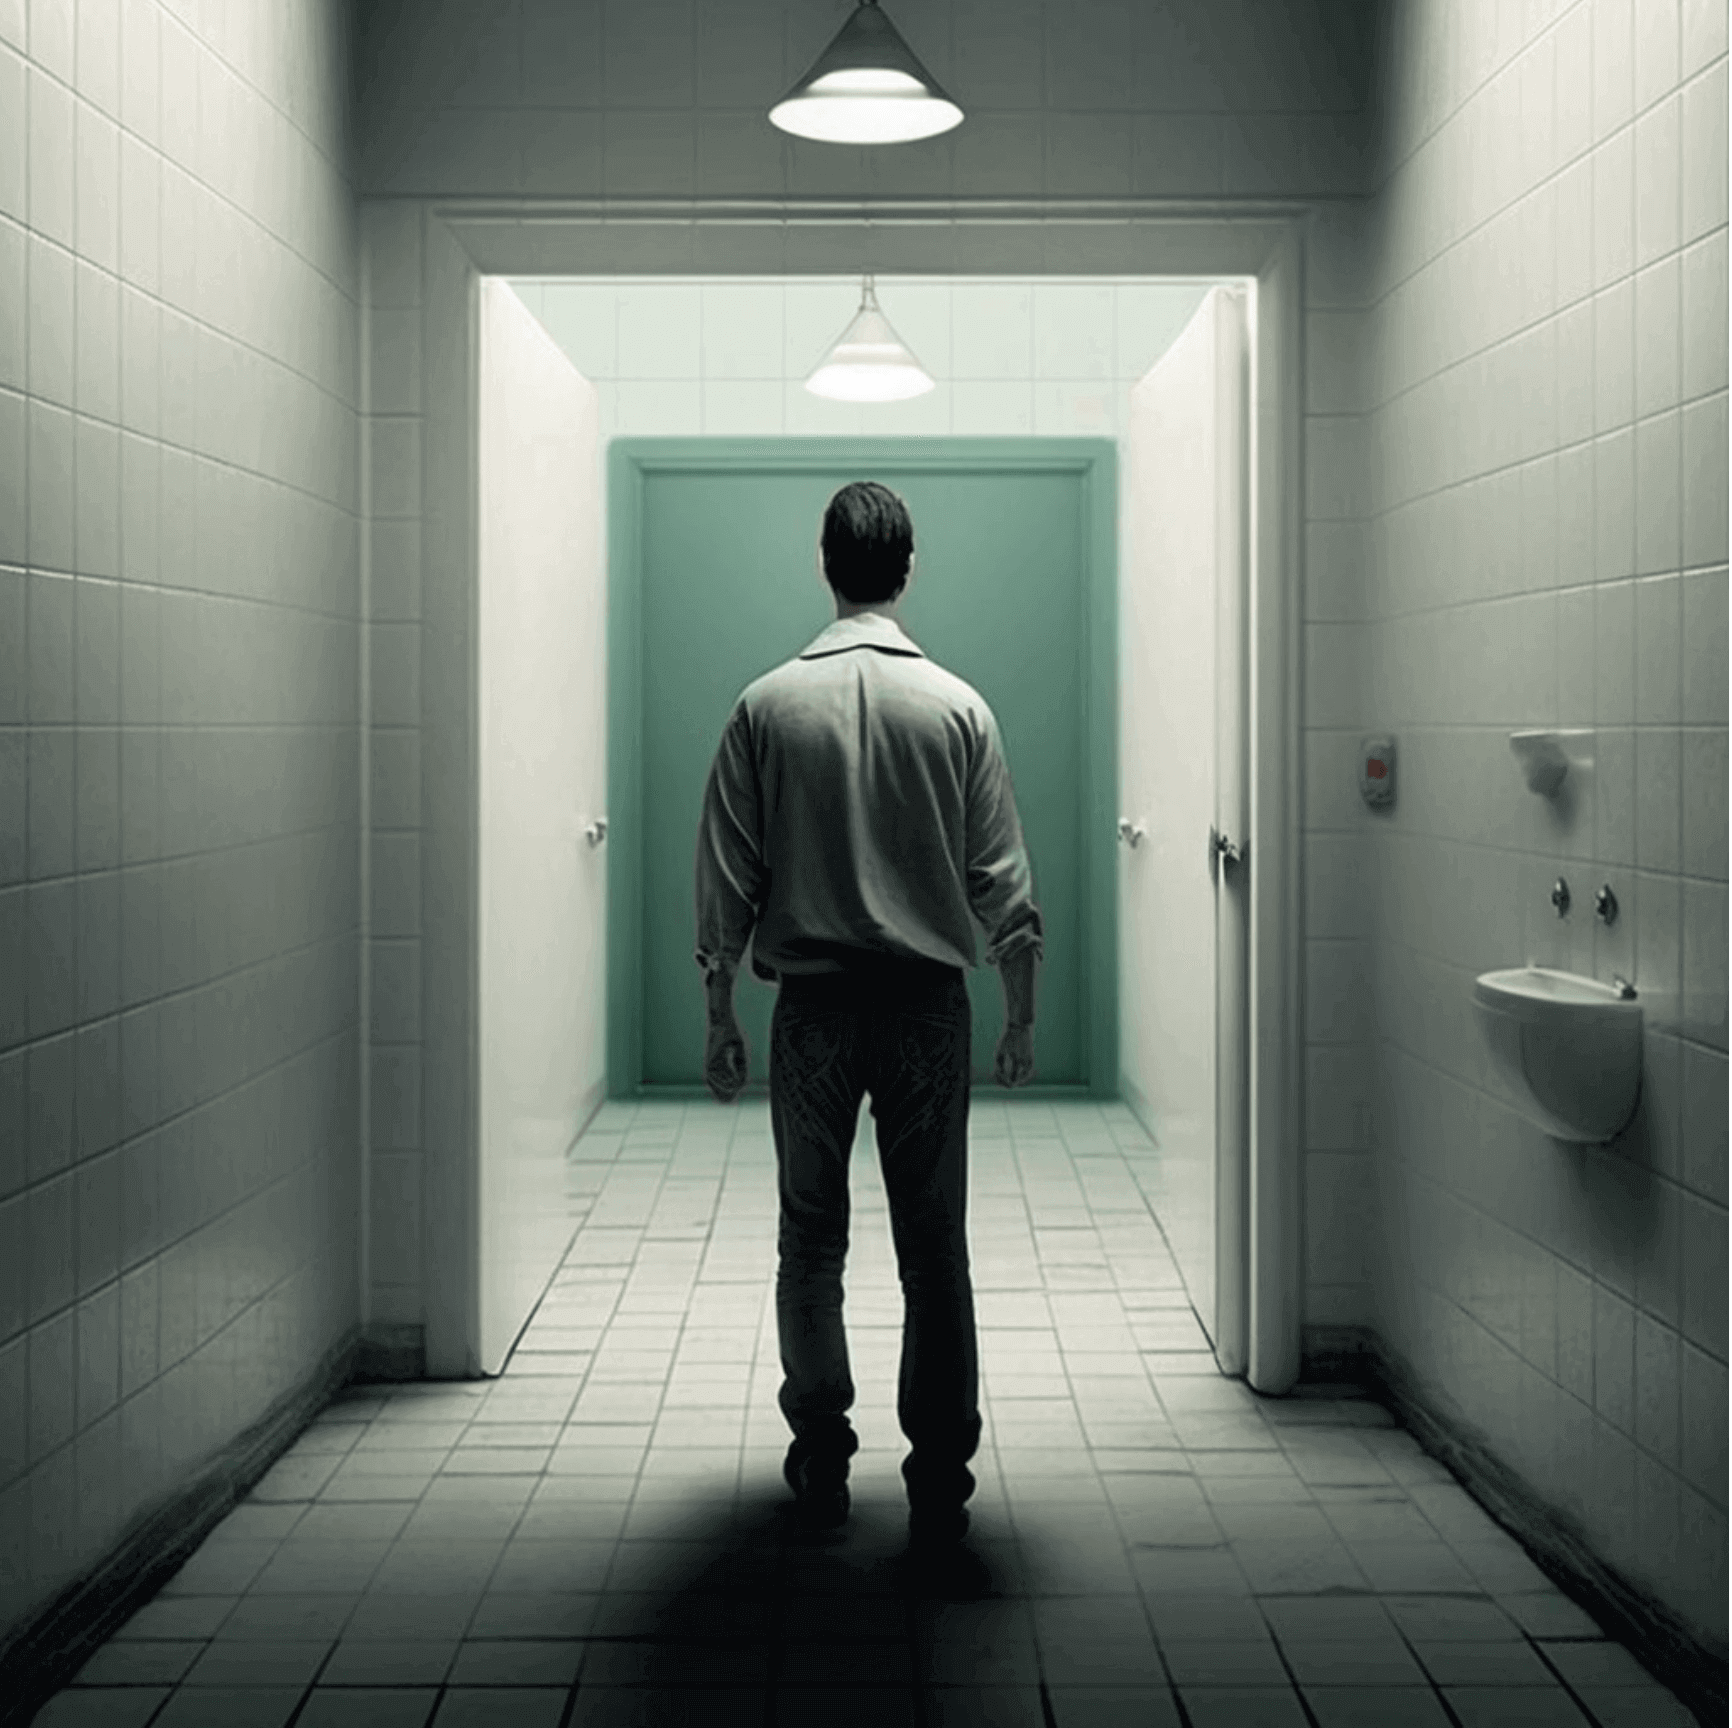 View of man from behind as he stands in front of a bathroom door